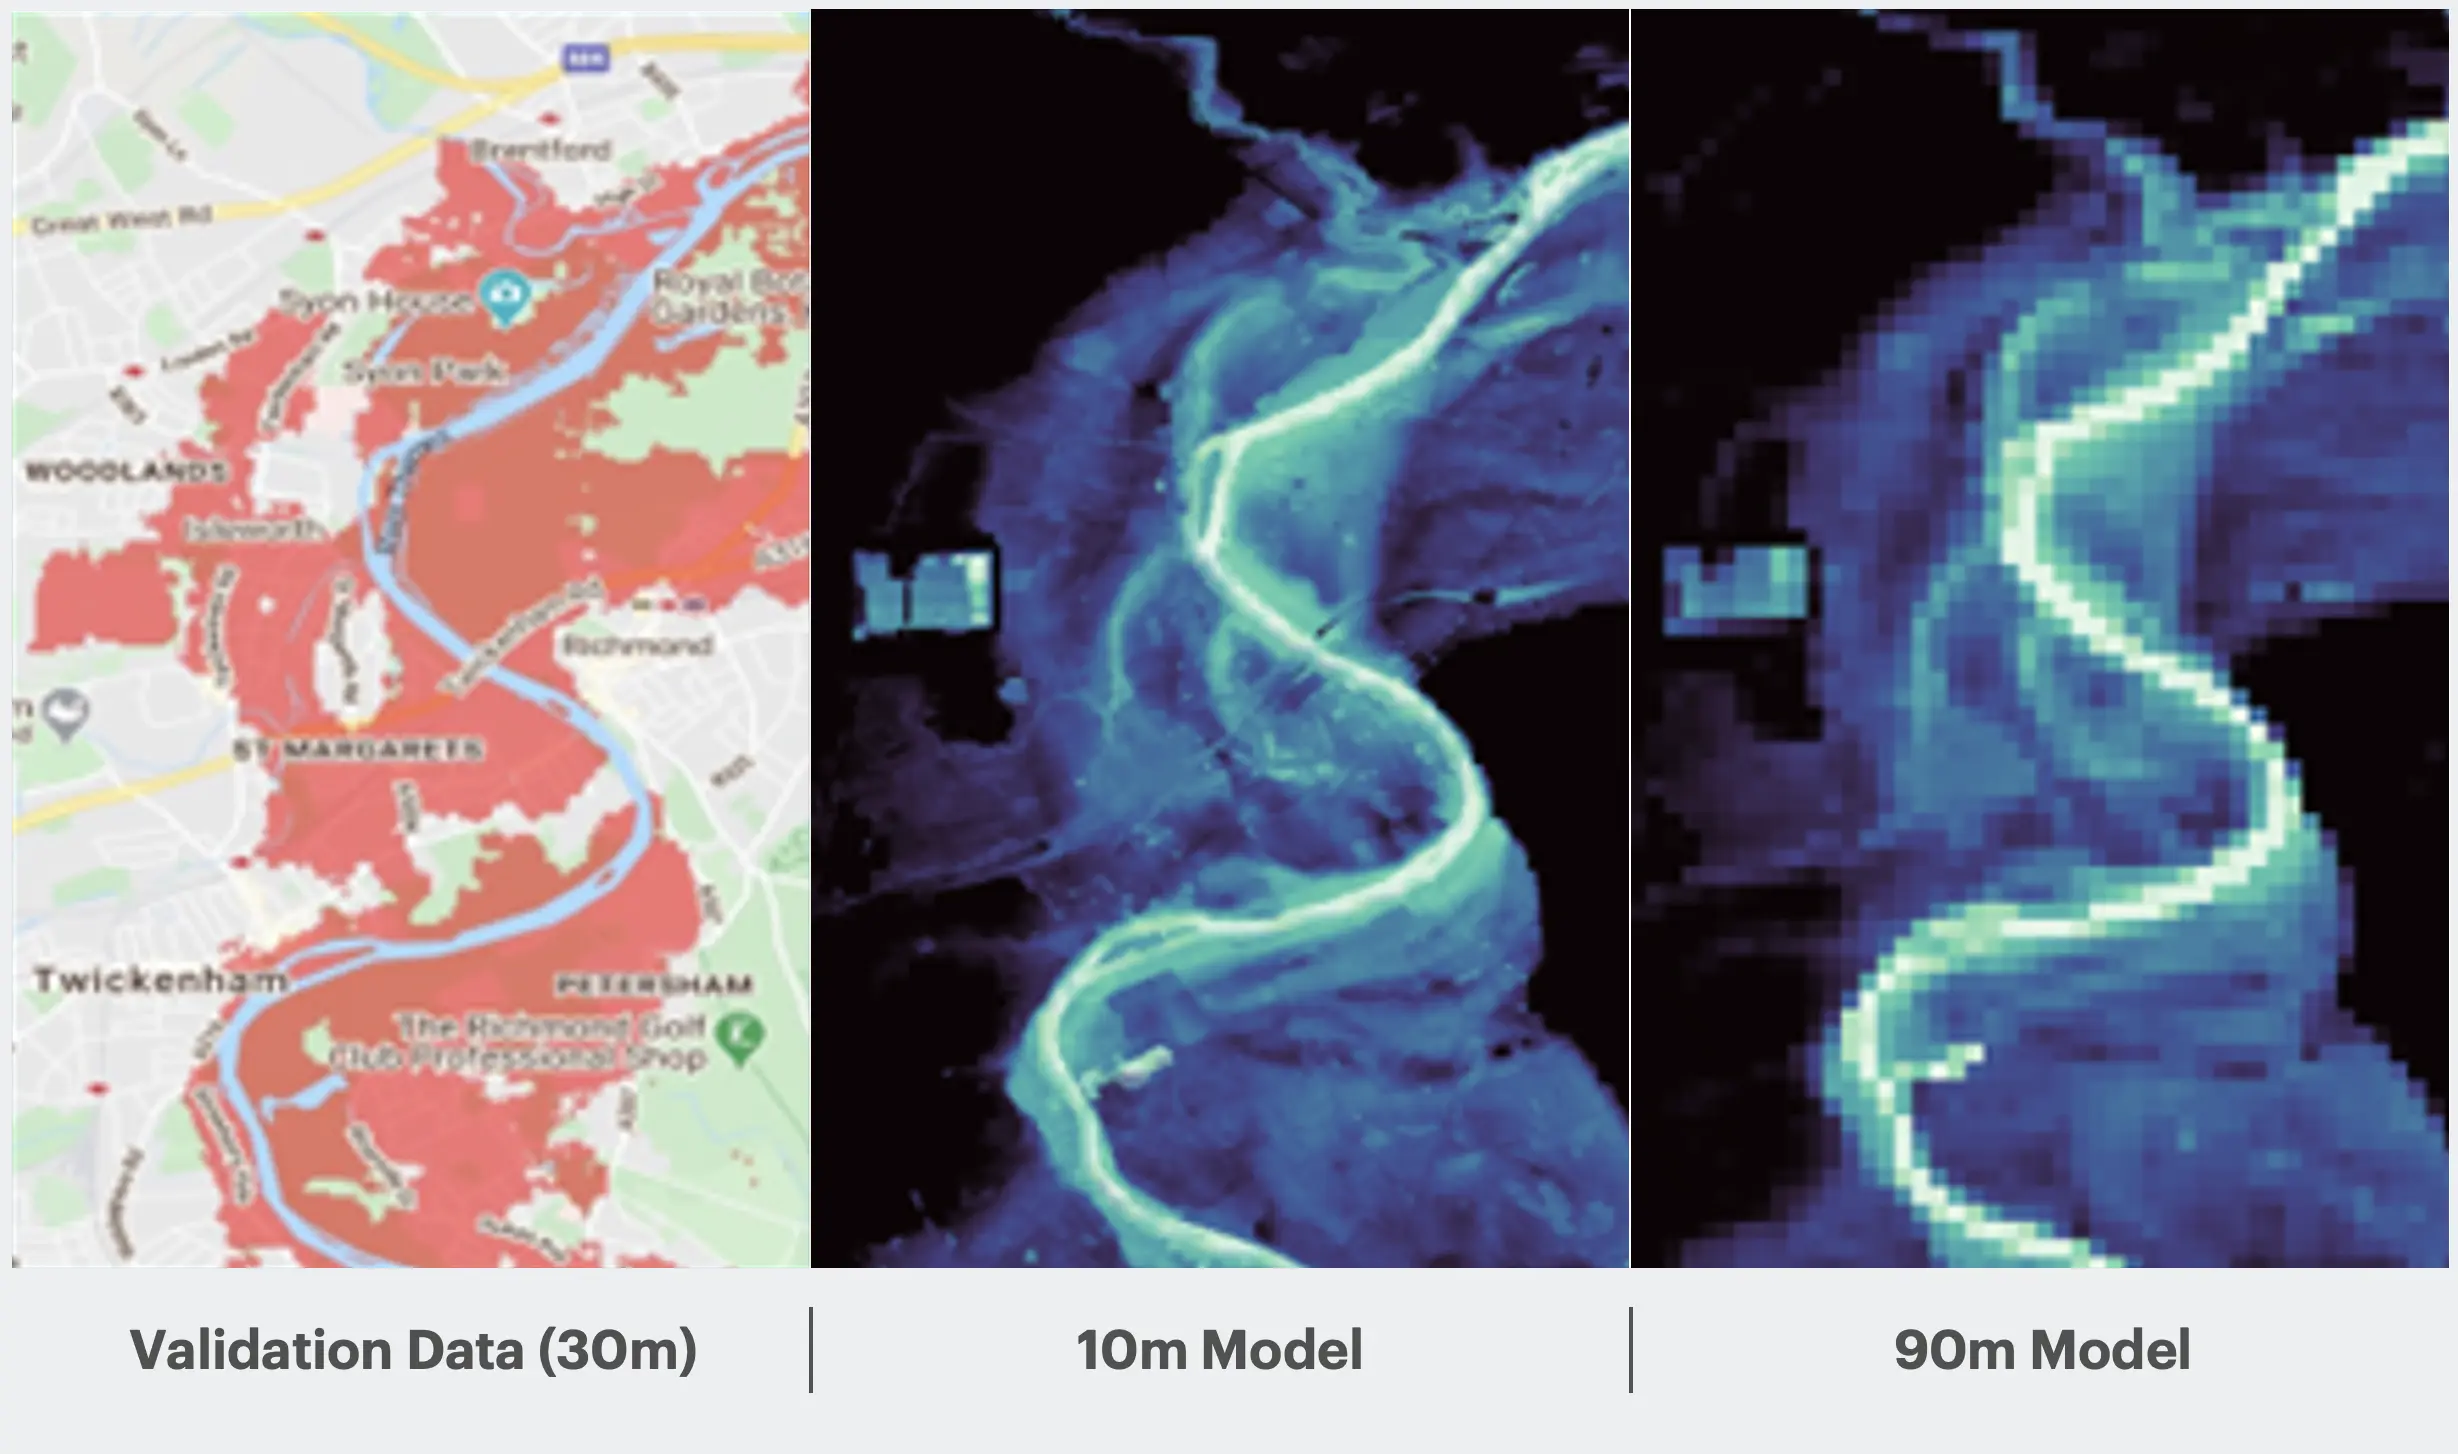 Validation data for historical flood extent. If the validation data is at 30m resolution, we aren’t able to say how accurate a 10m model is at reproducing flood extent. But we can use the 30m data to validate a 90m model.